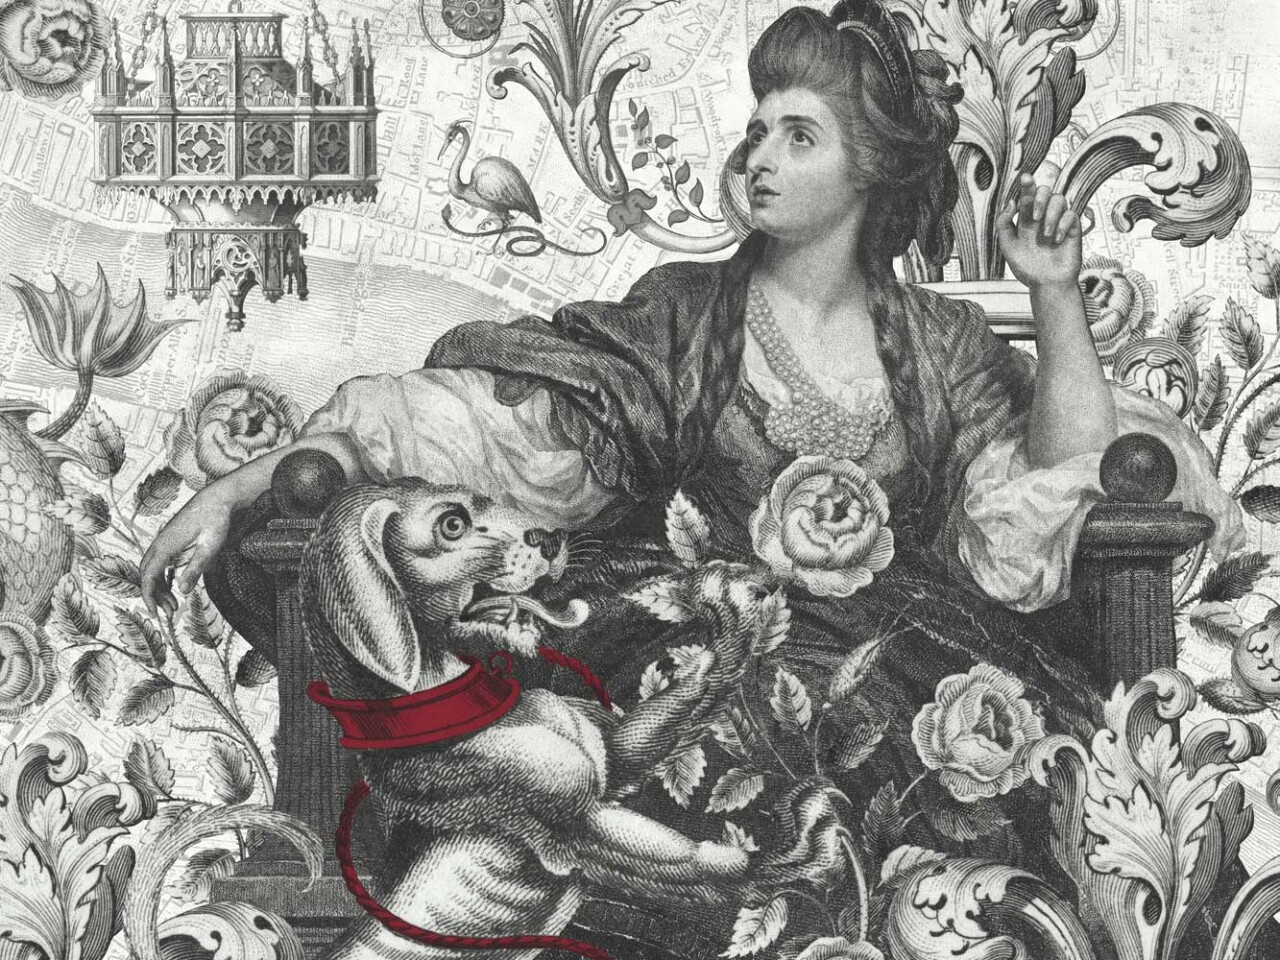 Detailed section of the regency beau monde wallpaper design featuring the famous british actress Mrs Siddons